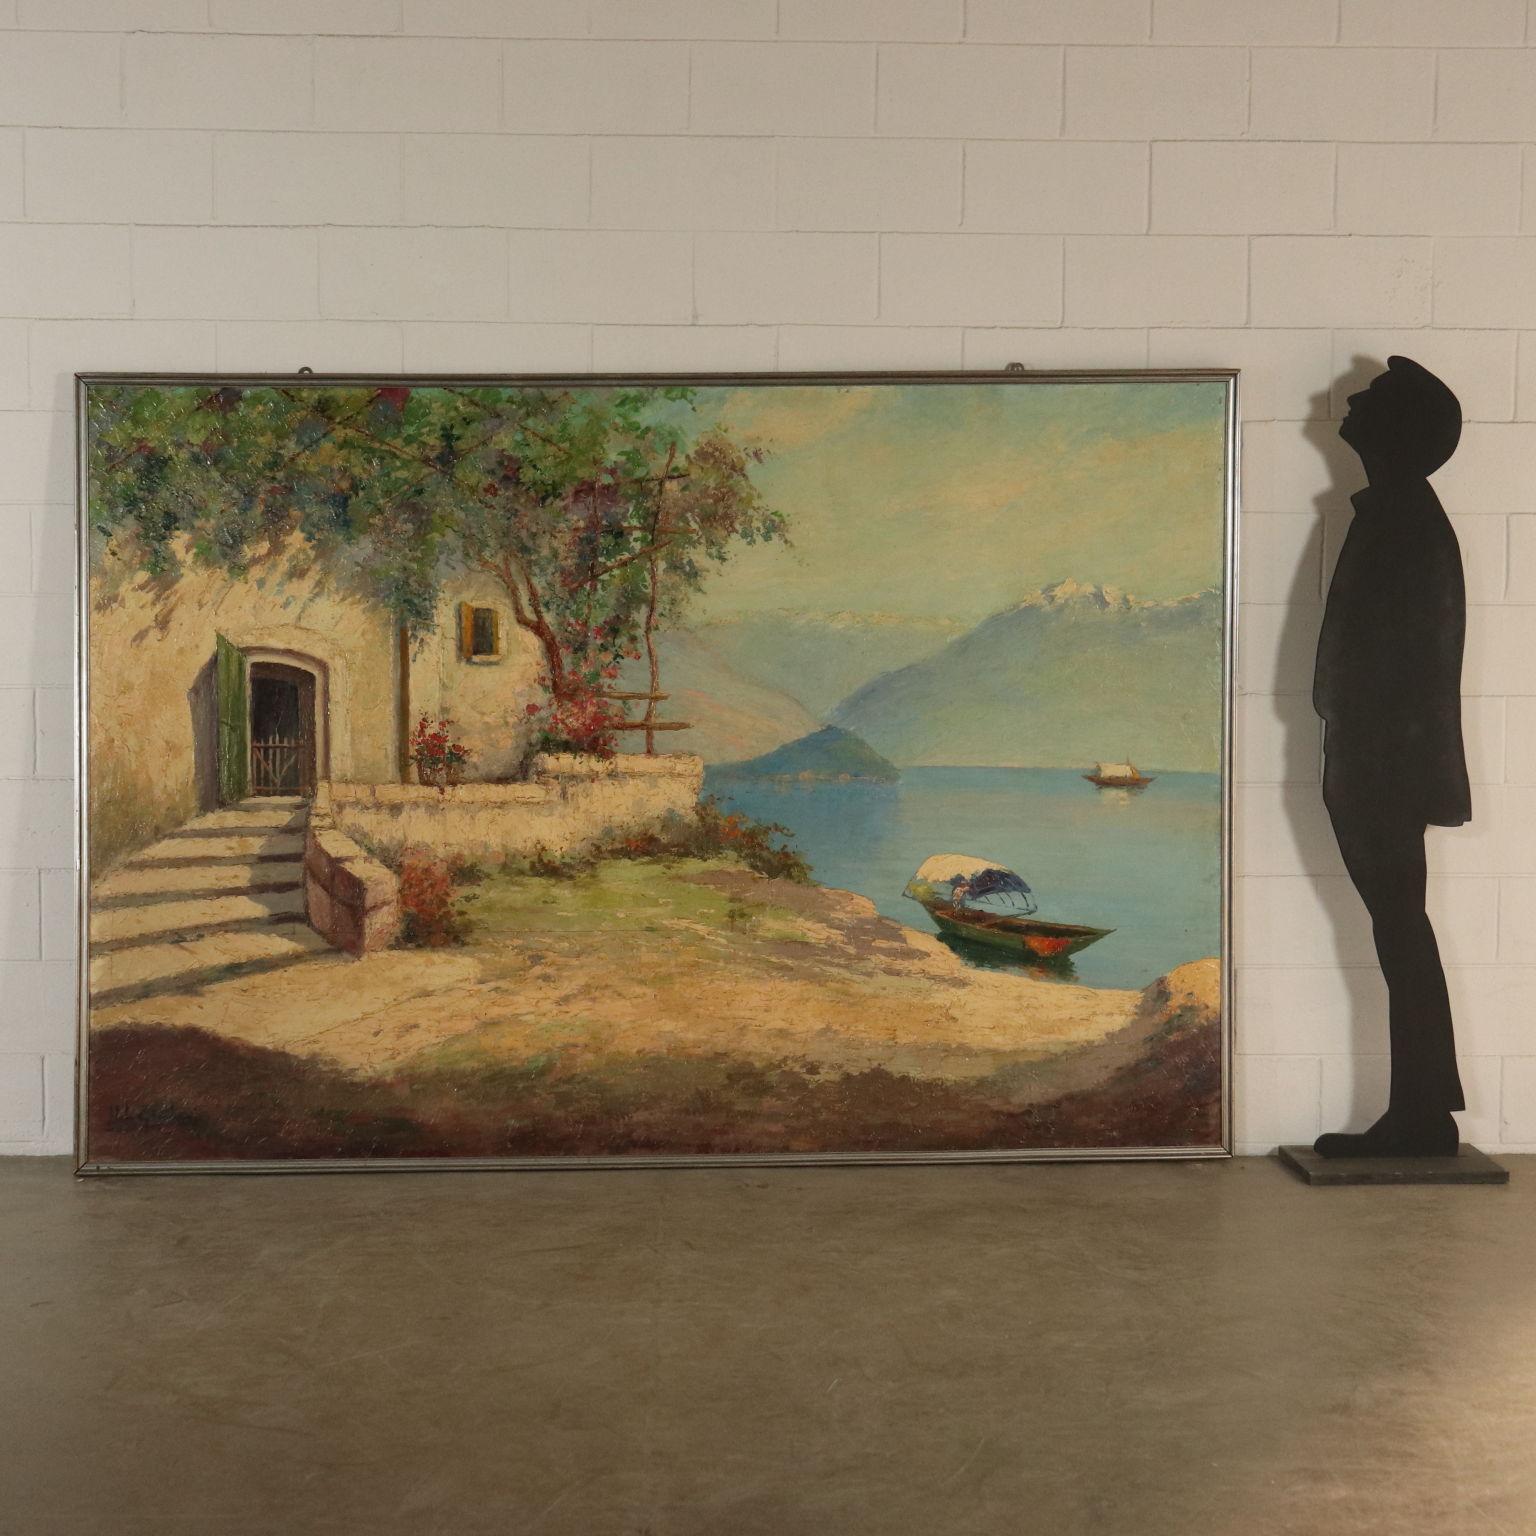 Oil on plywood. Signed at the bottom left. Large dimensions, the painting depicts a glimpse of Lake Como from a location situated between Lierna and Varenna. A building with flowers is depicted on the left part of the painting. To the right, you can